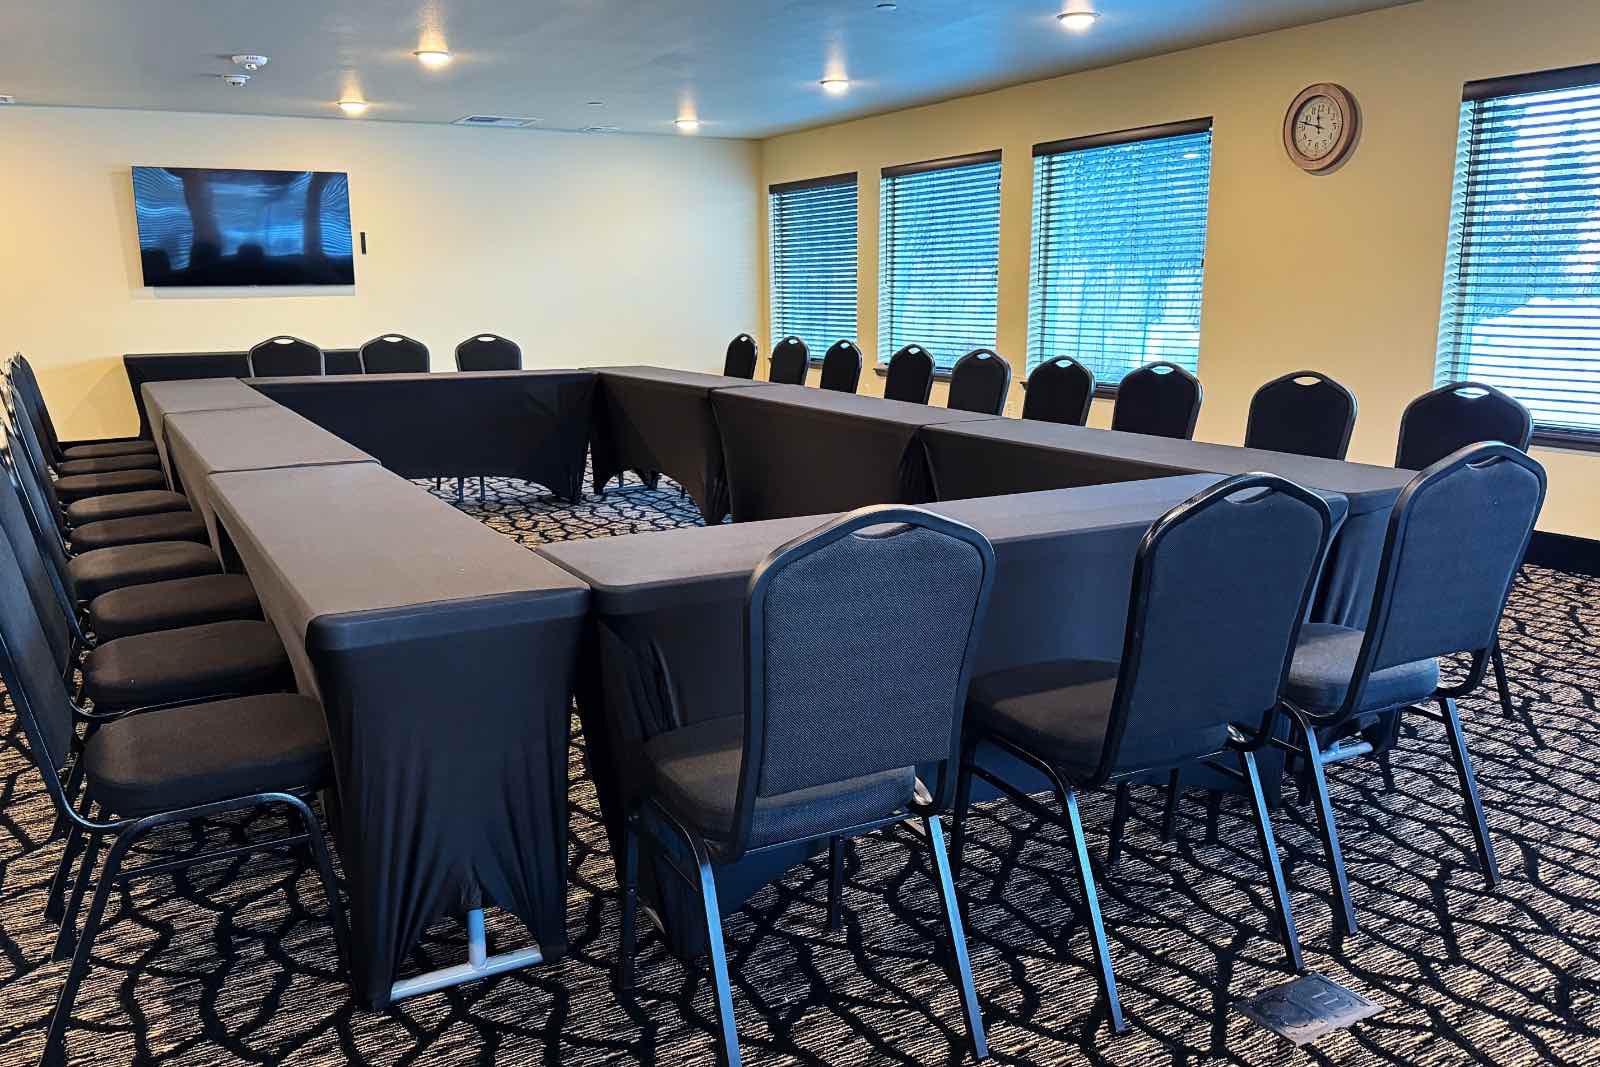 Homer, Alaska meeting room. Tables arranged in a big rectangle with brown table cloths, chairs and a TV on the wall.